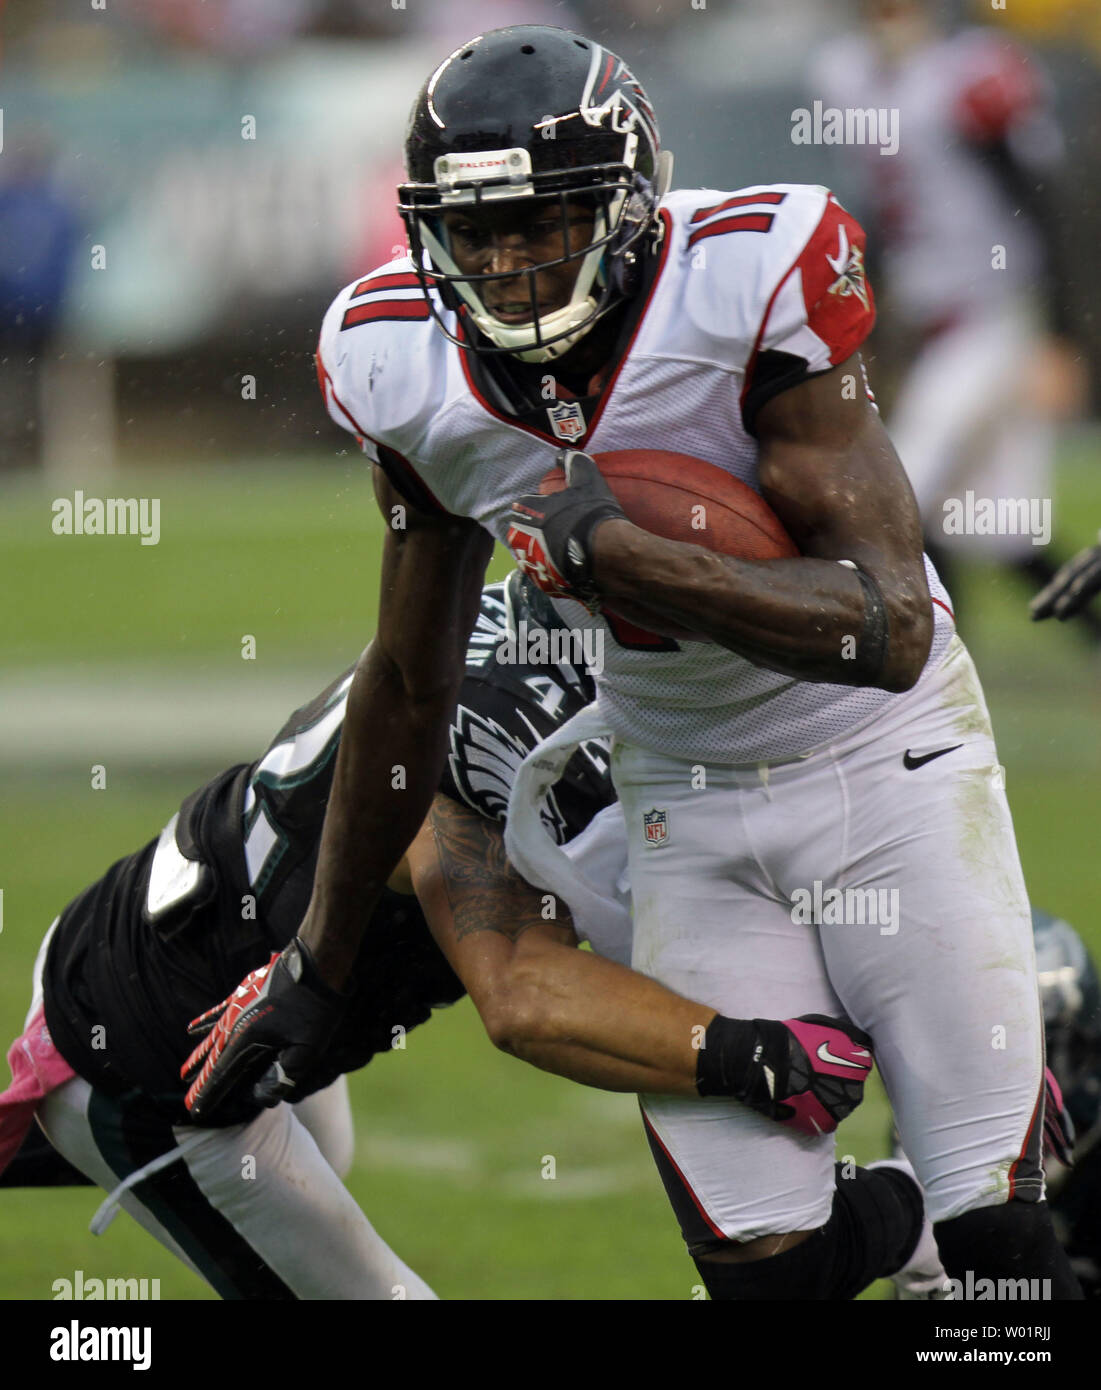 The Atlanta Falcons' Julio Jones is tackled by Philadelphia Eagles' Curt Coleman in the third quarter of NFL action at Lincoln Financial Field in Philadelphia on October 28, 2012.  Falcons defeated the Eagles 30-17.  UPI/Laurence Kesterson Stock Photo